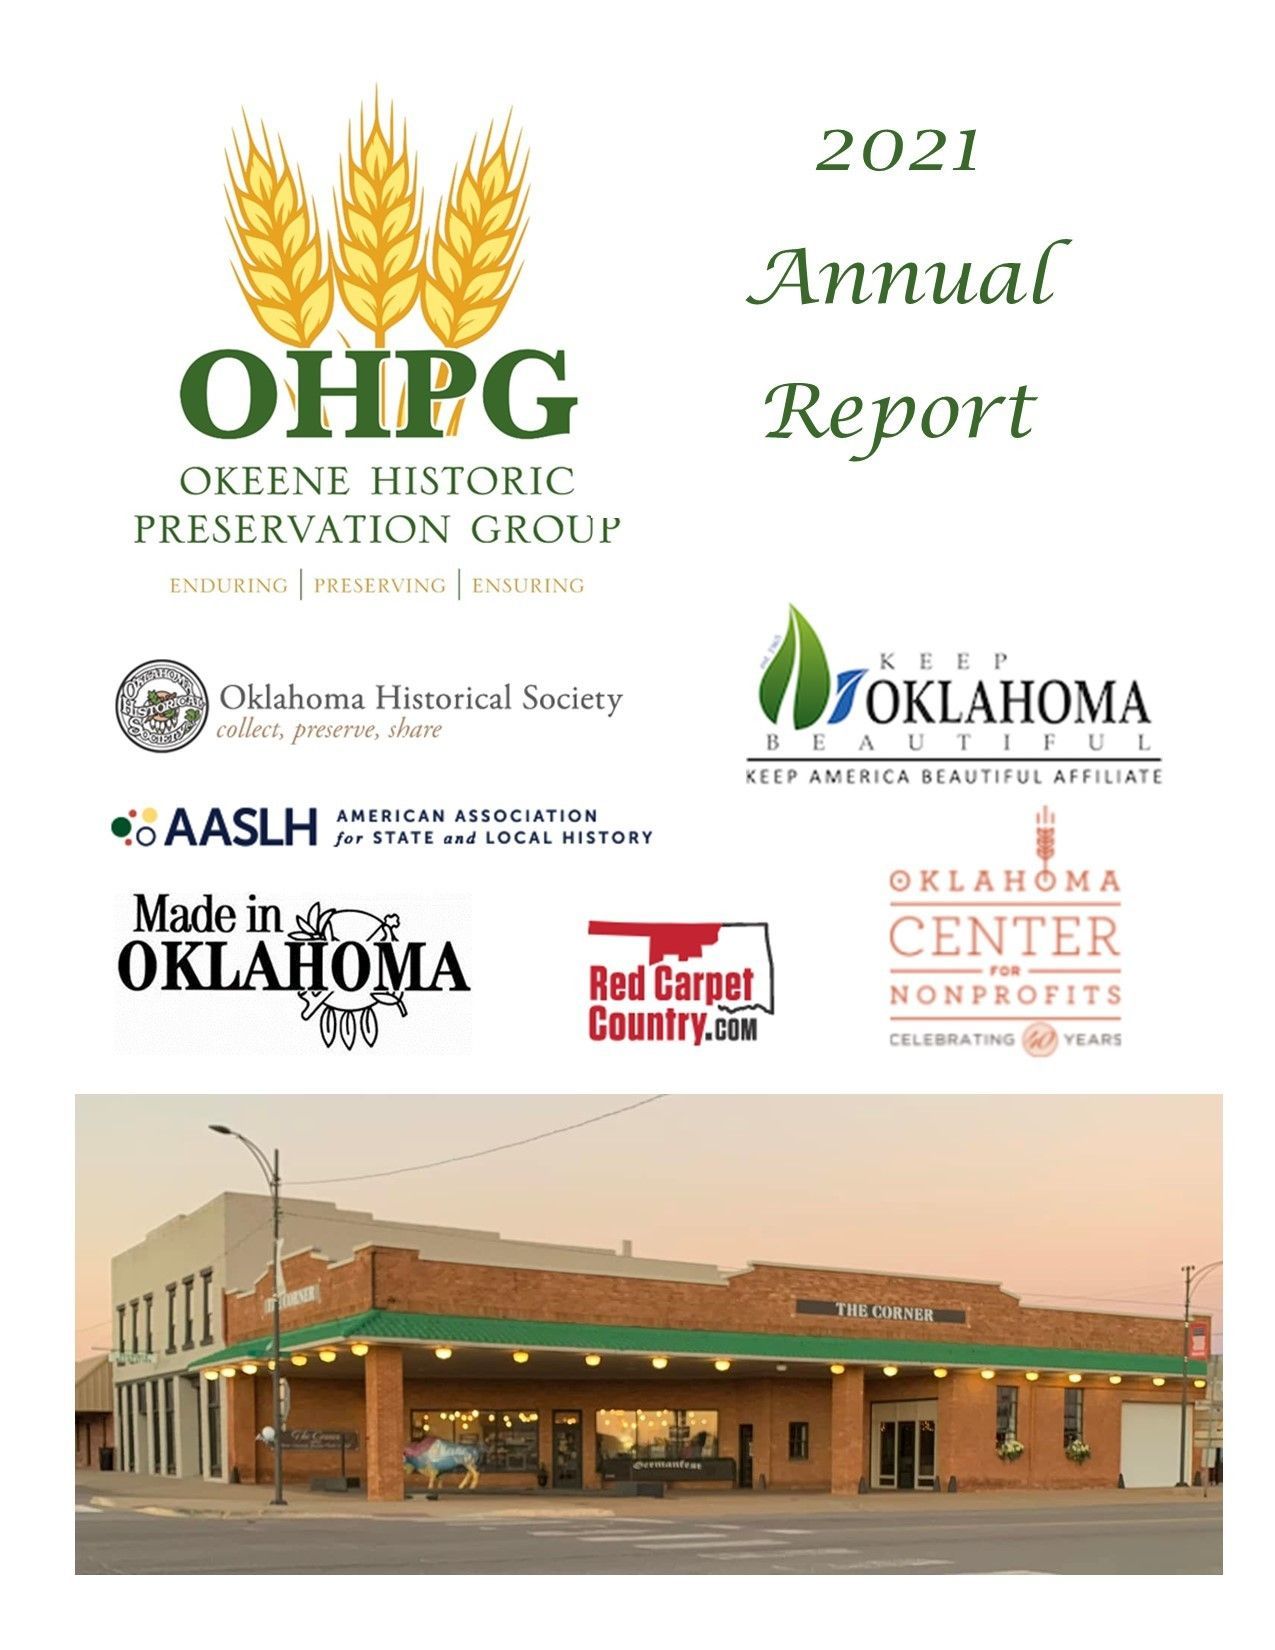 Click here to see 2021 OHPG Annual Report